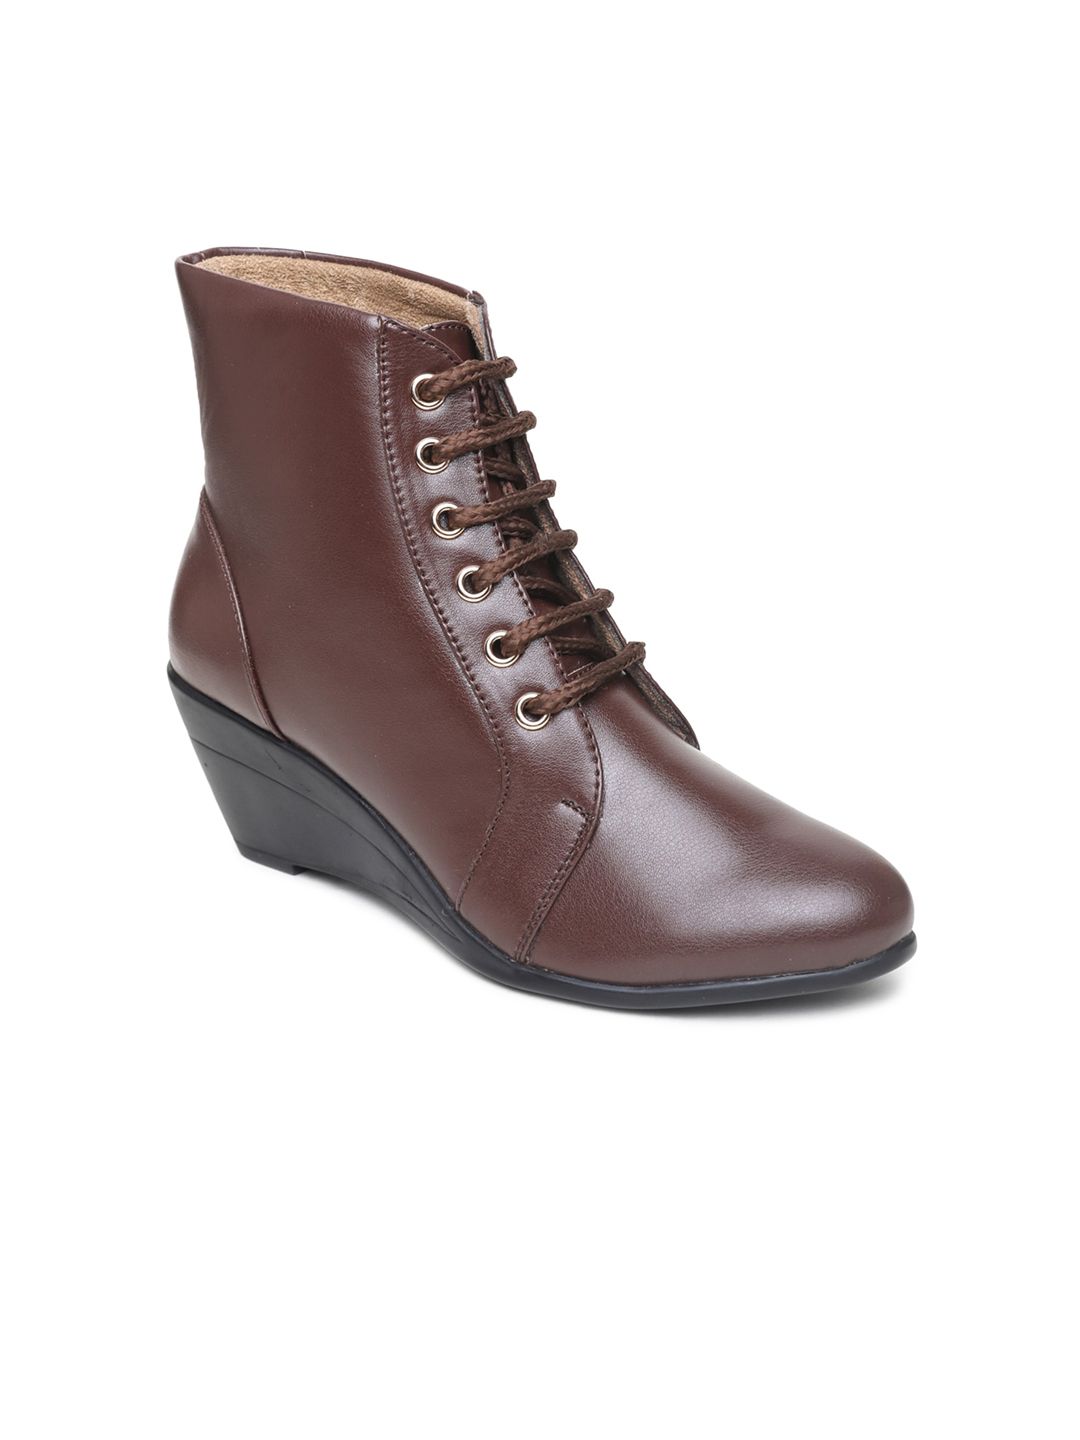 VALIOSAA Brown High-Top Wedge Heeled Boots Price in India